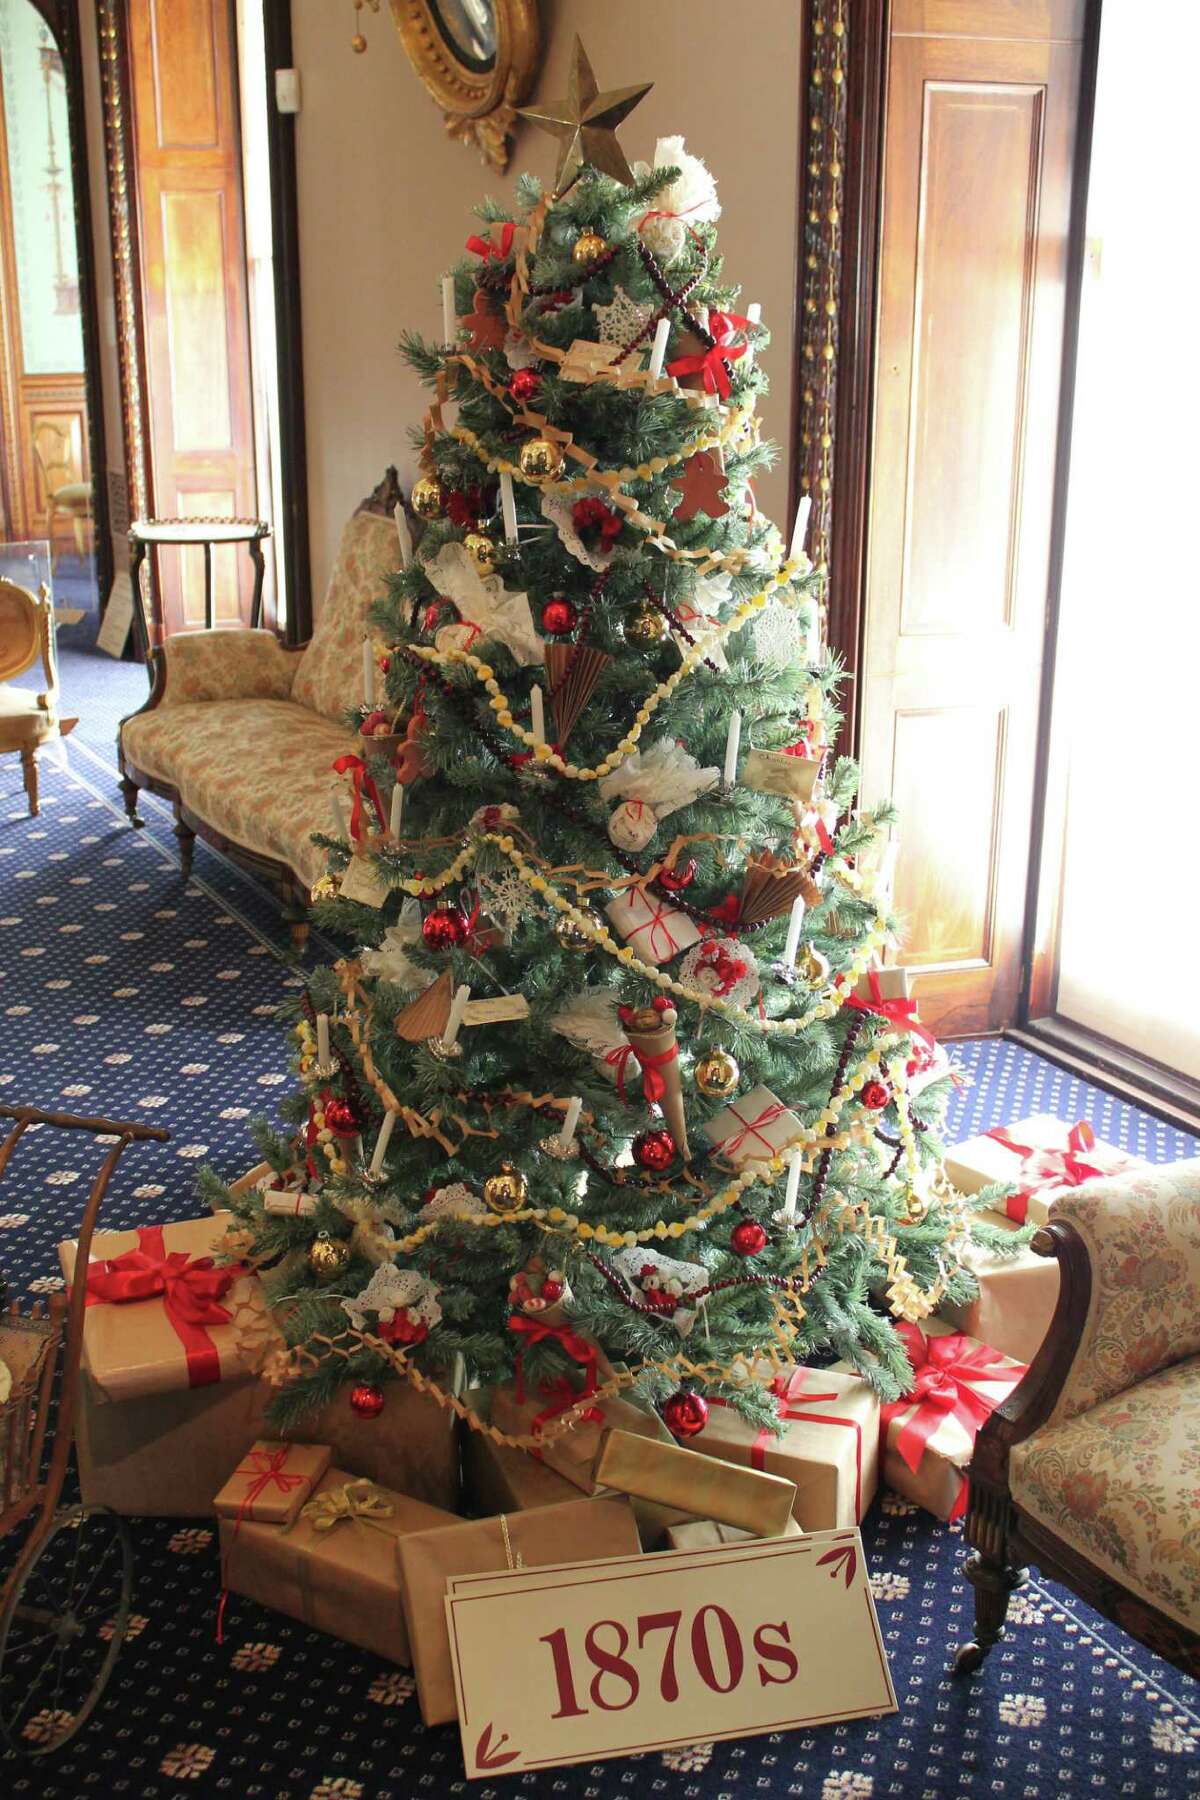 Christmas decorations in America began in earnest in the 1850s, when the concept of table-top trees were embraced by the growing middle class. This holiday season, Victorian holiday traditions will be the focus of events at the Lockwood-Mathews Mansion Museum, in Norwalk, above, and Bridgeport's Barnum Museum.